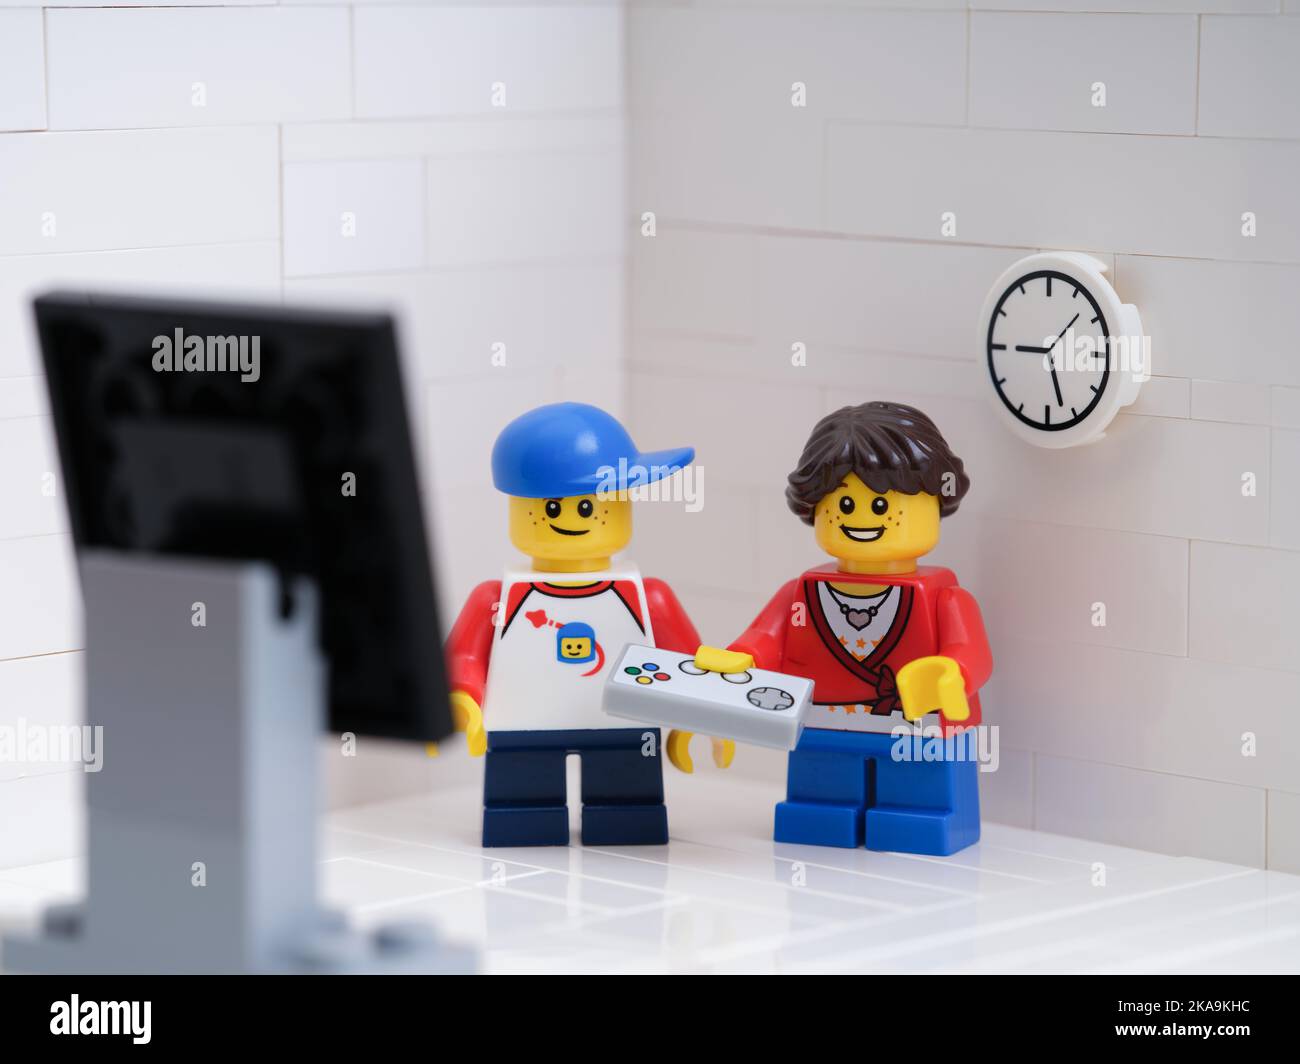 Tambov, Russian Federation - September 6, 2022 Two Lego kid minifigures playing a video game using a gamepad. Stock Photo